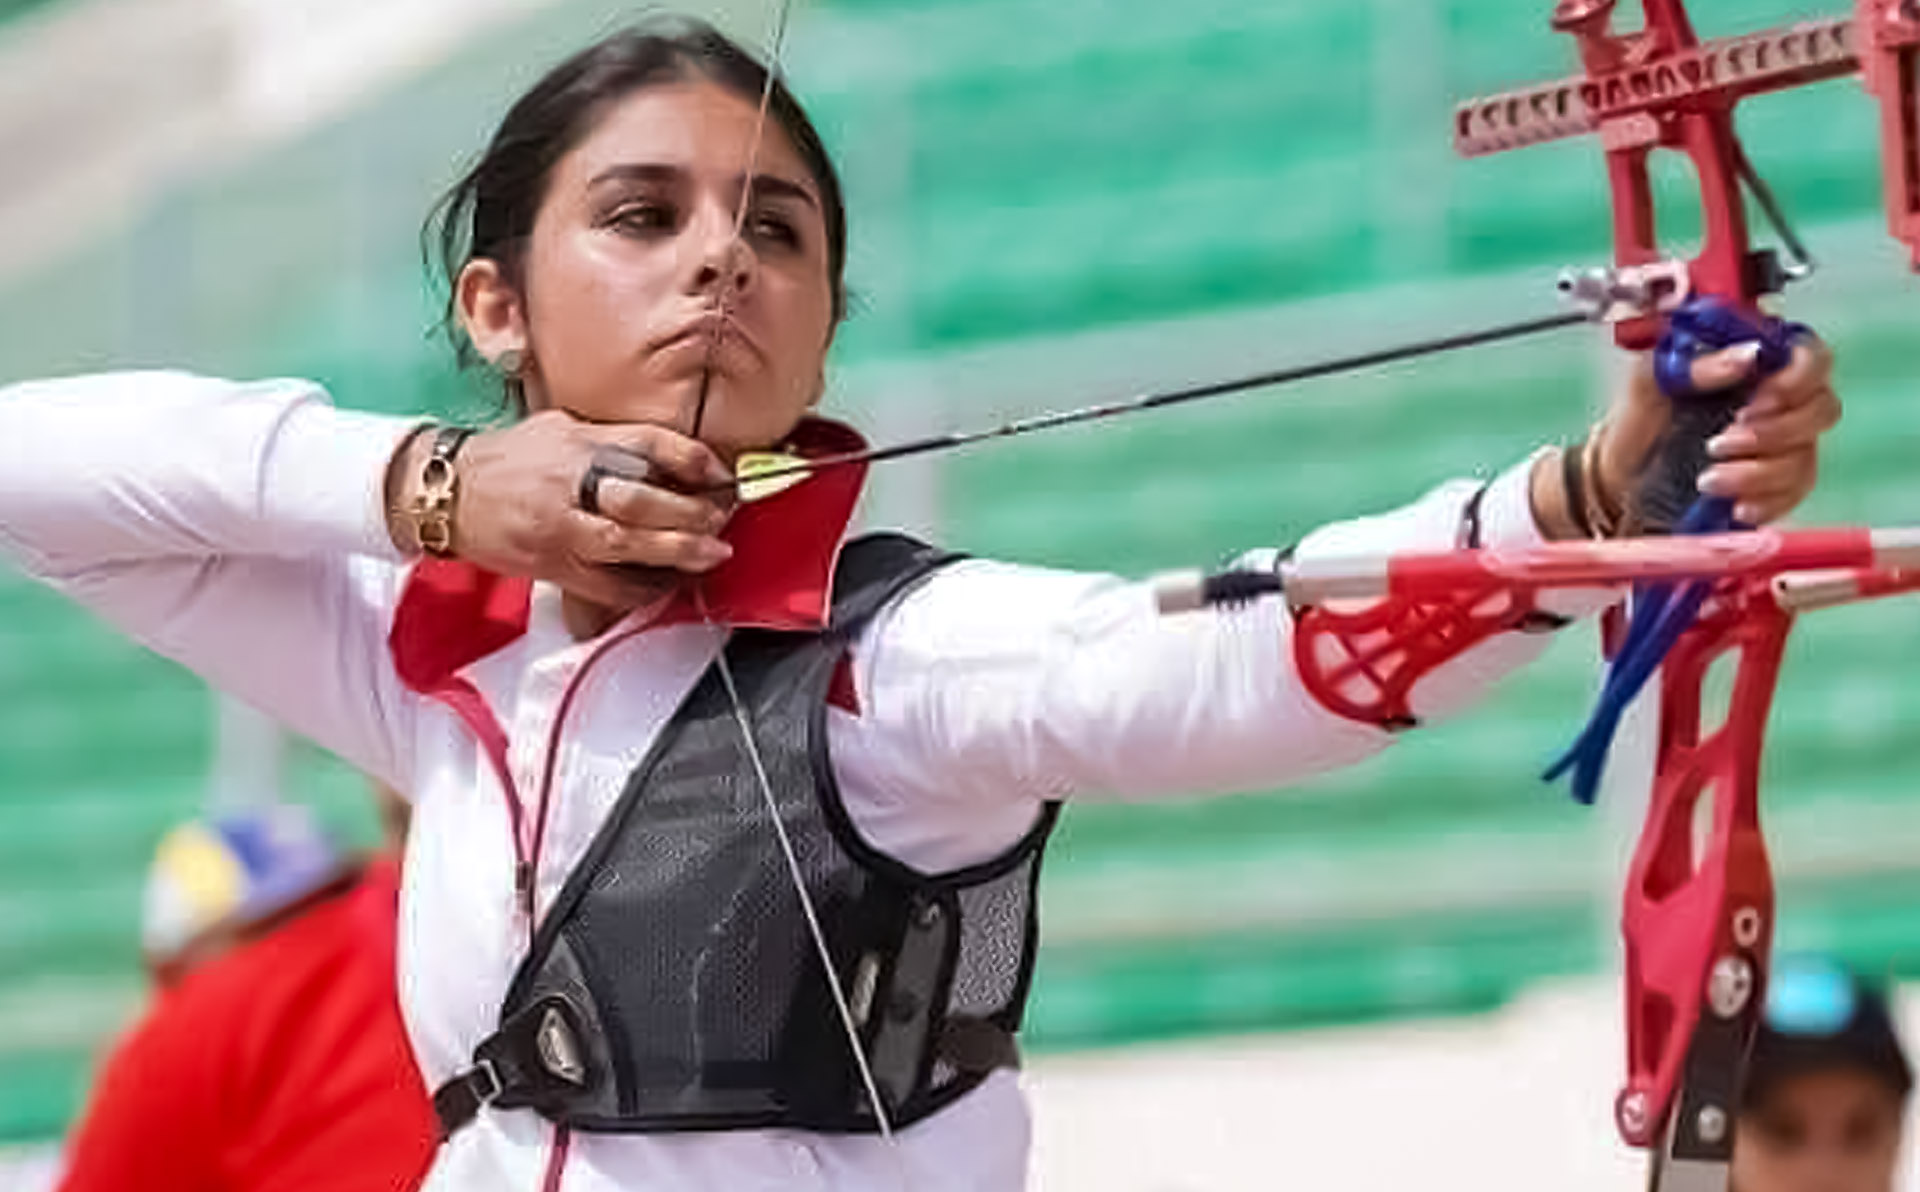 Syrian archer Al-Masry wins five medals at Arab Championship